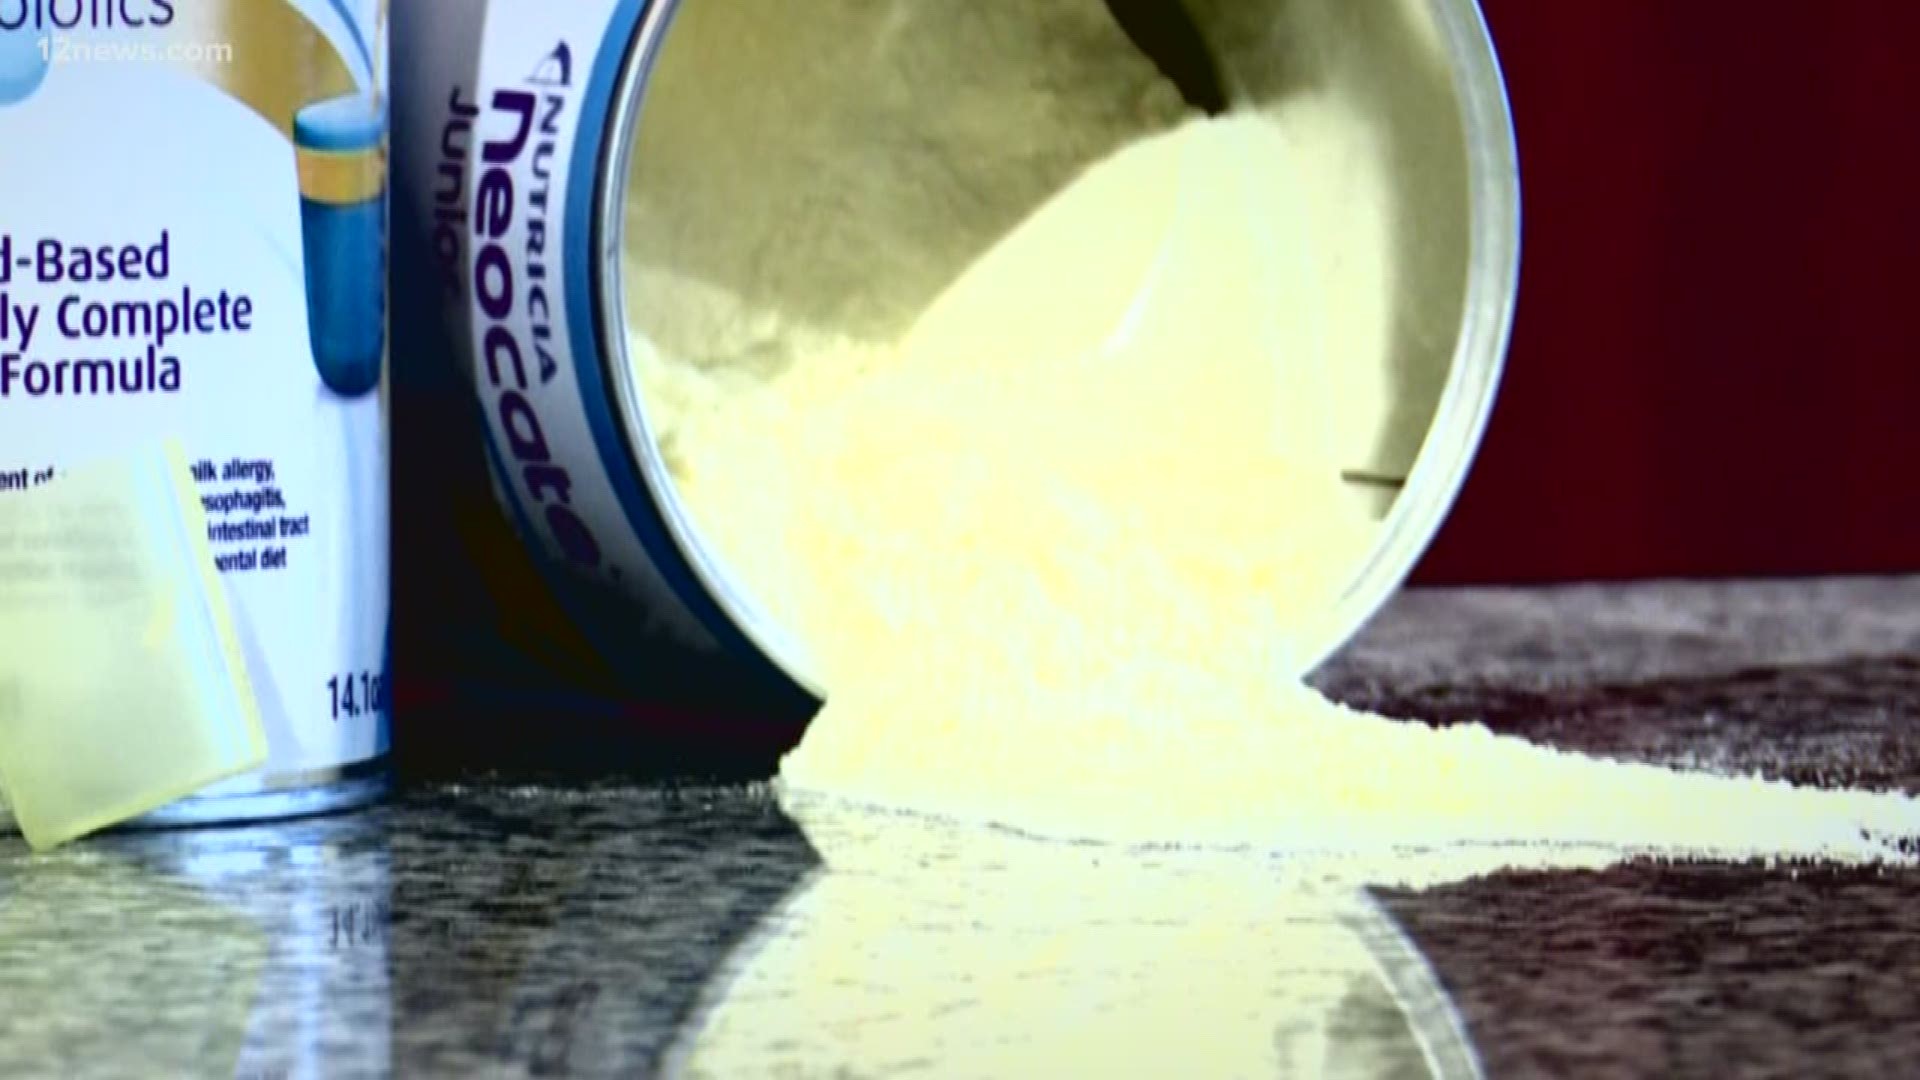 A new mom has been buying her baby's formula from a Walmart in Goodyear. After noticing the consistency and color was off she checked the box more closely, discovering the formula had been tampered with.